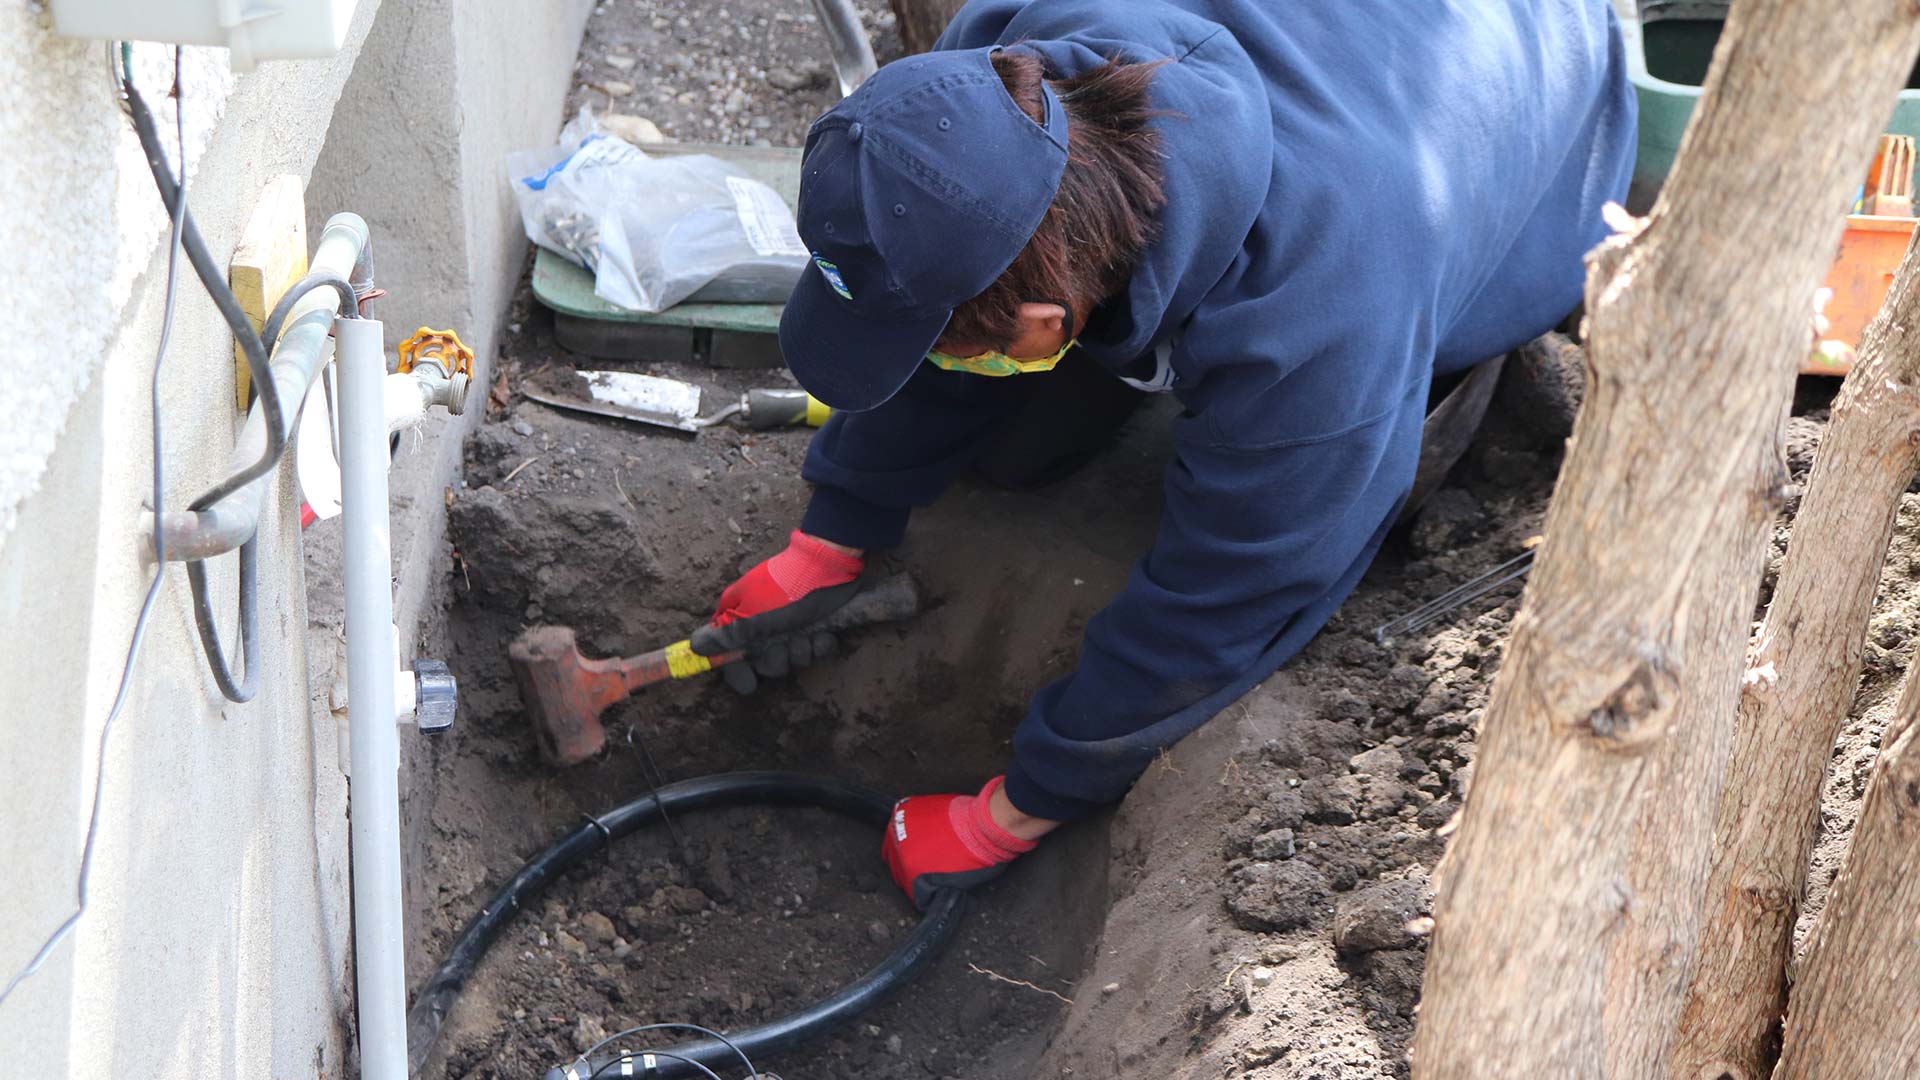 Irrigation expert repairing a system at a home in Cochrane, AB.